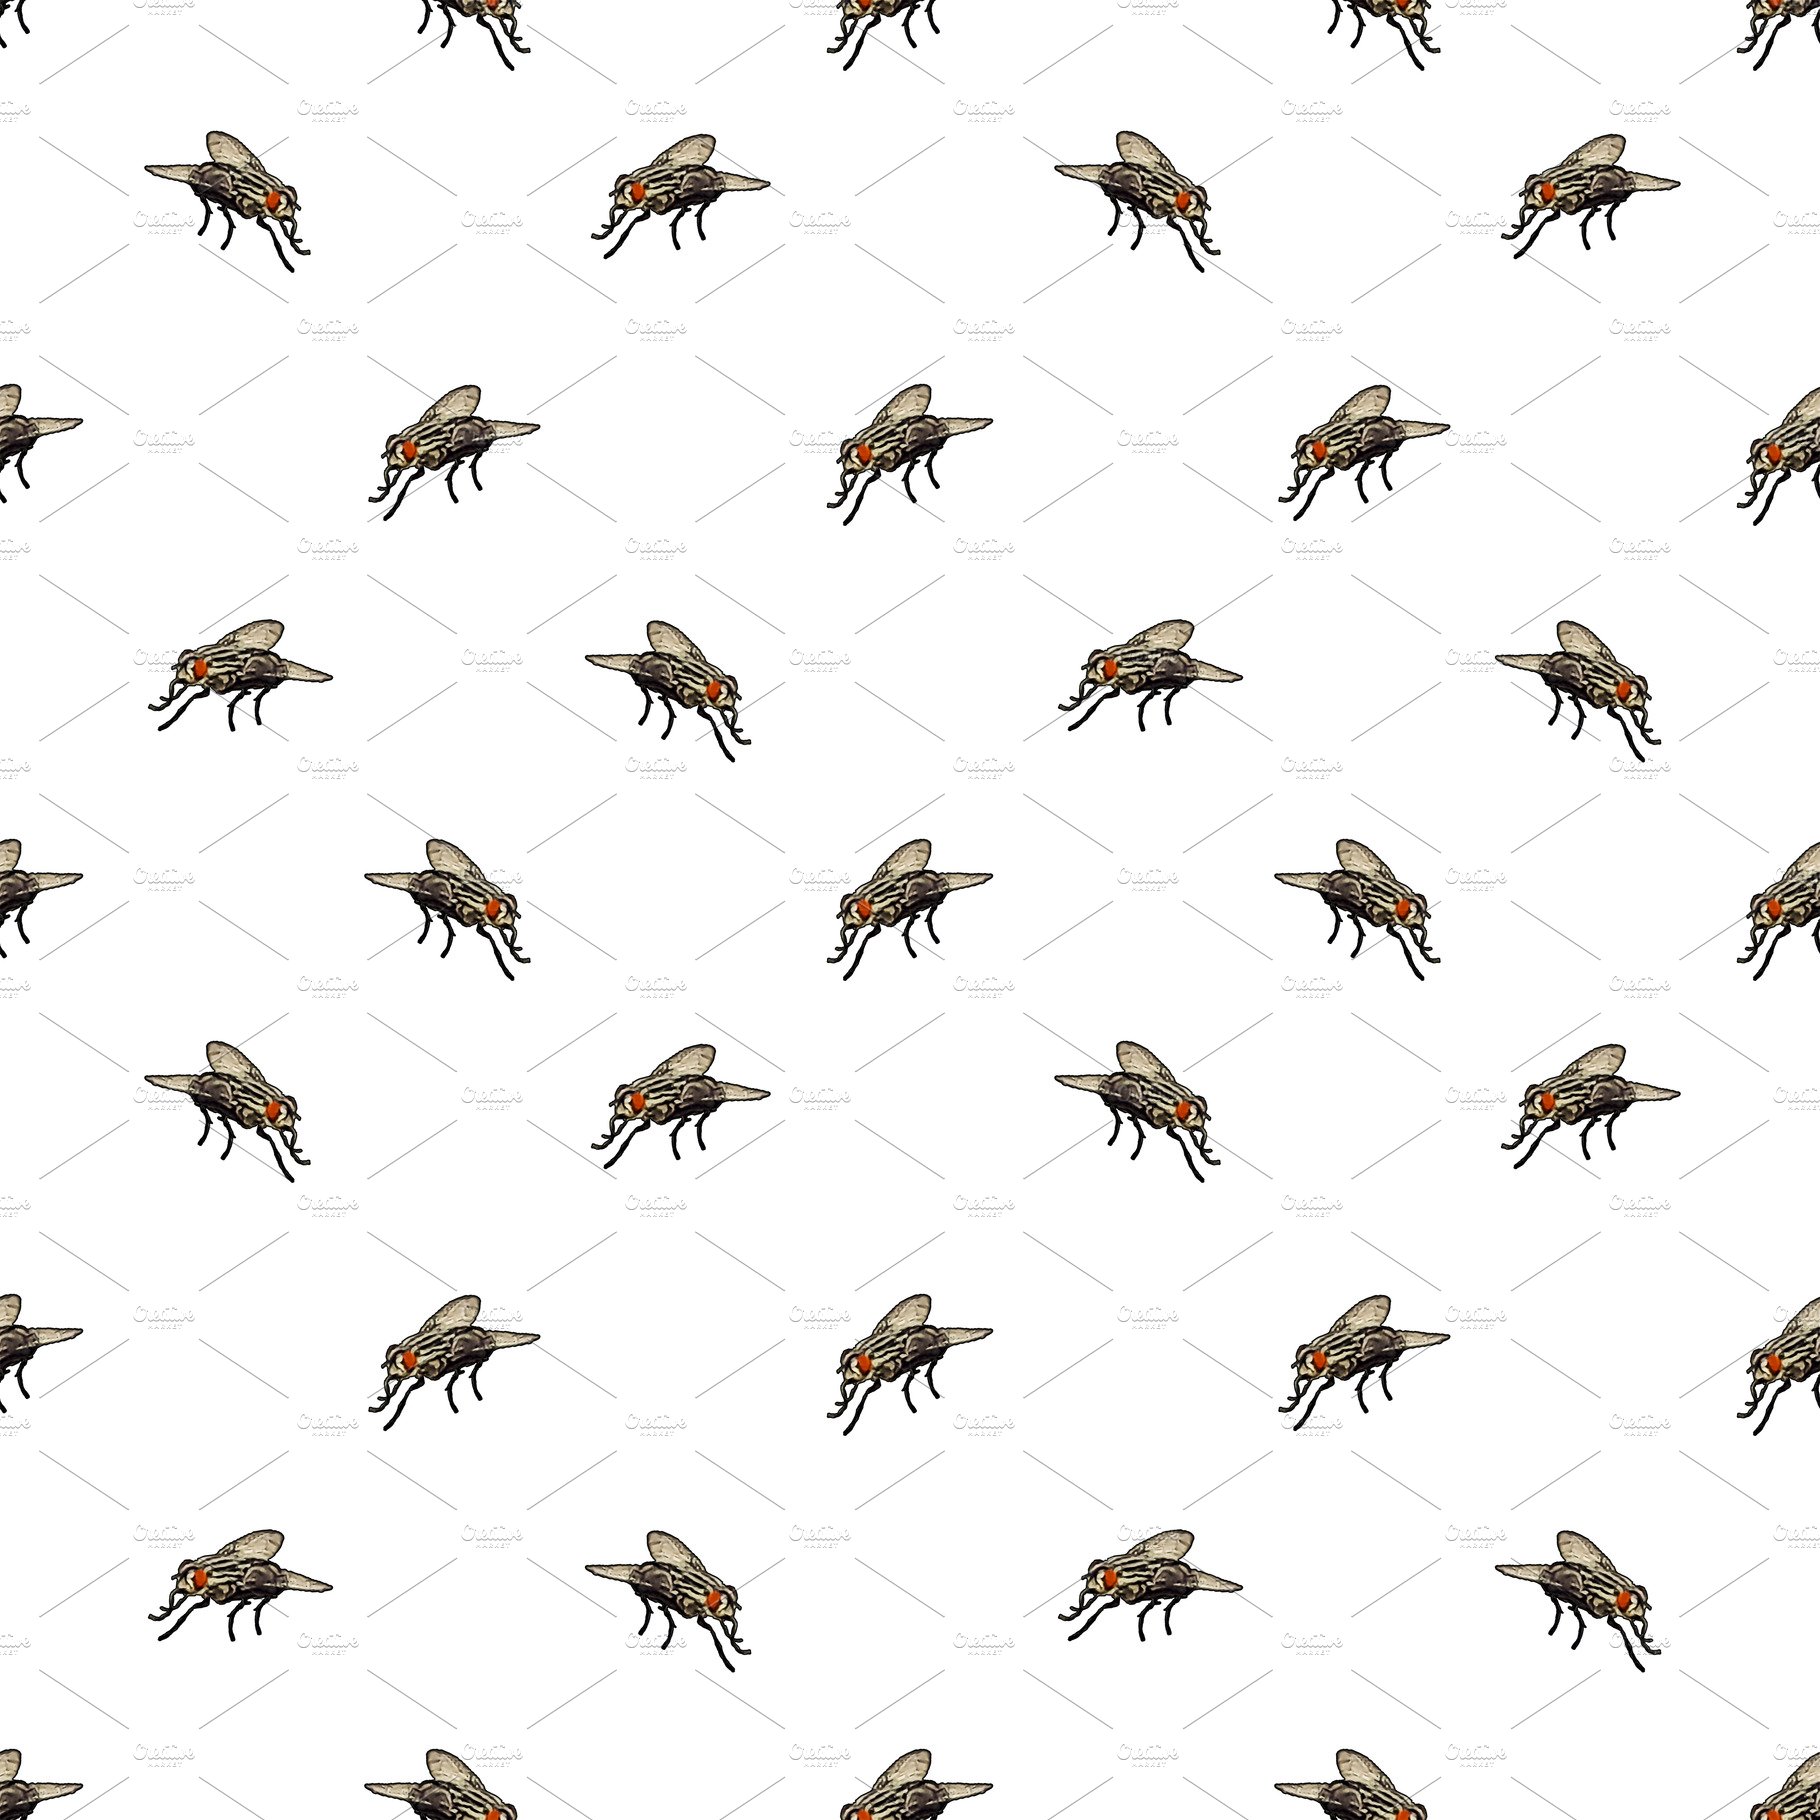 HouseFly Motif Seamless Pattern cover image.